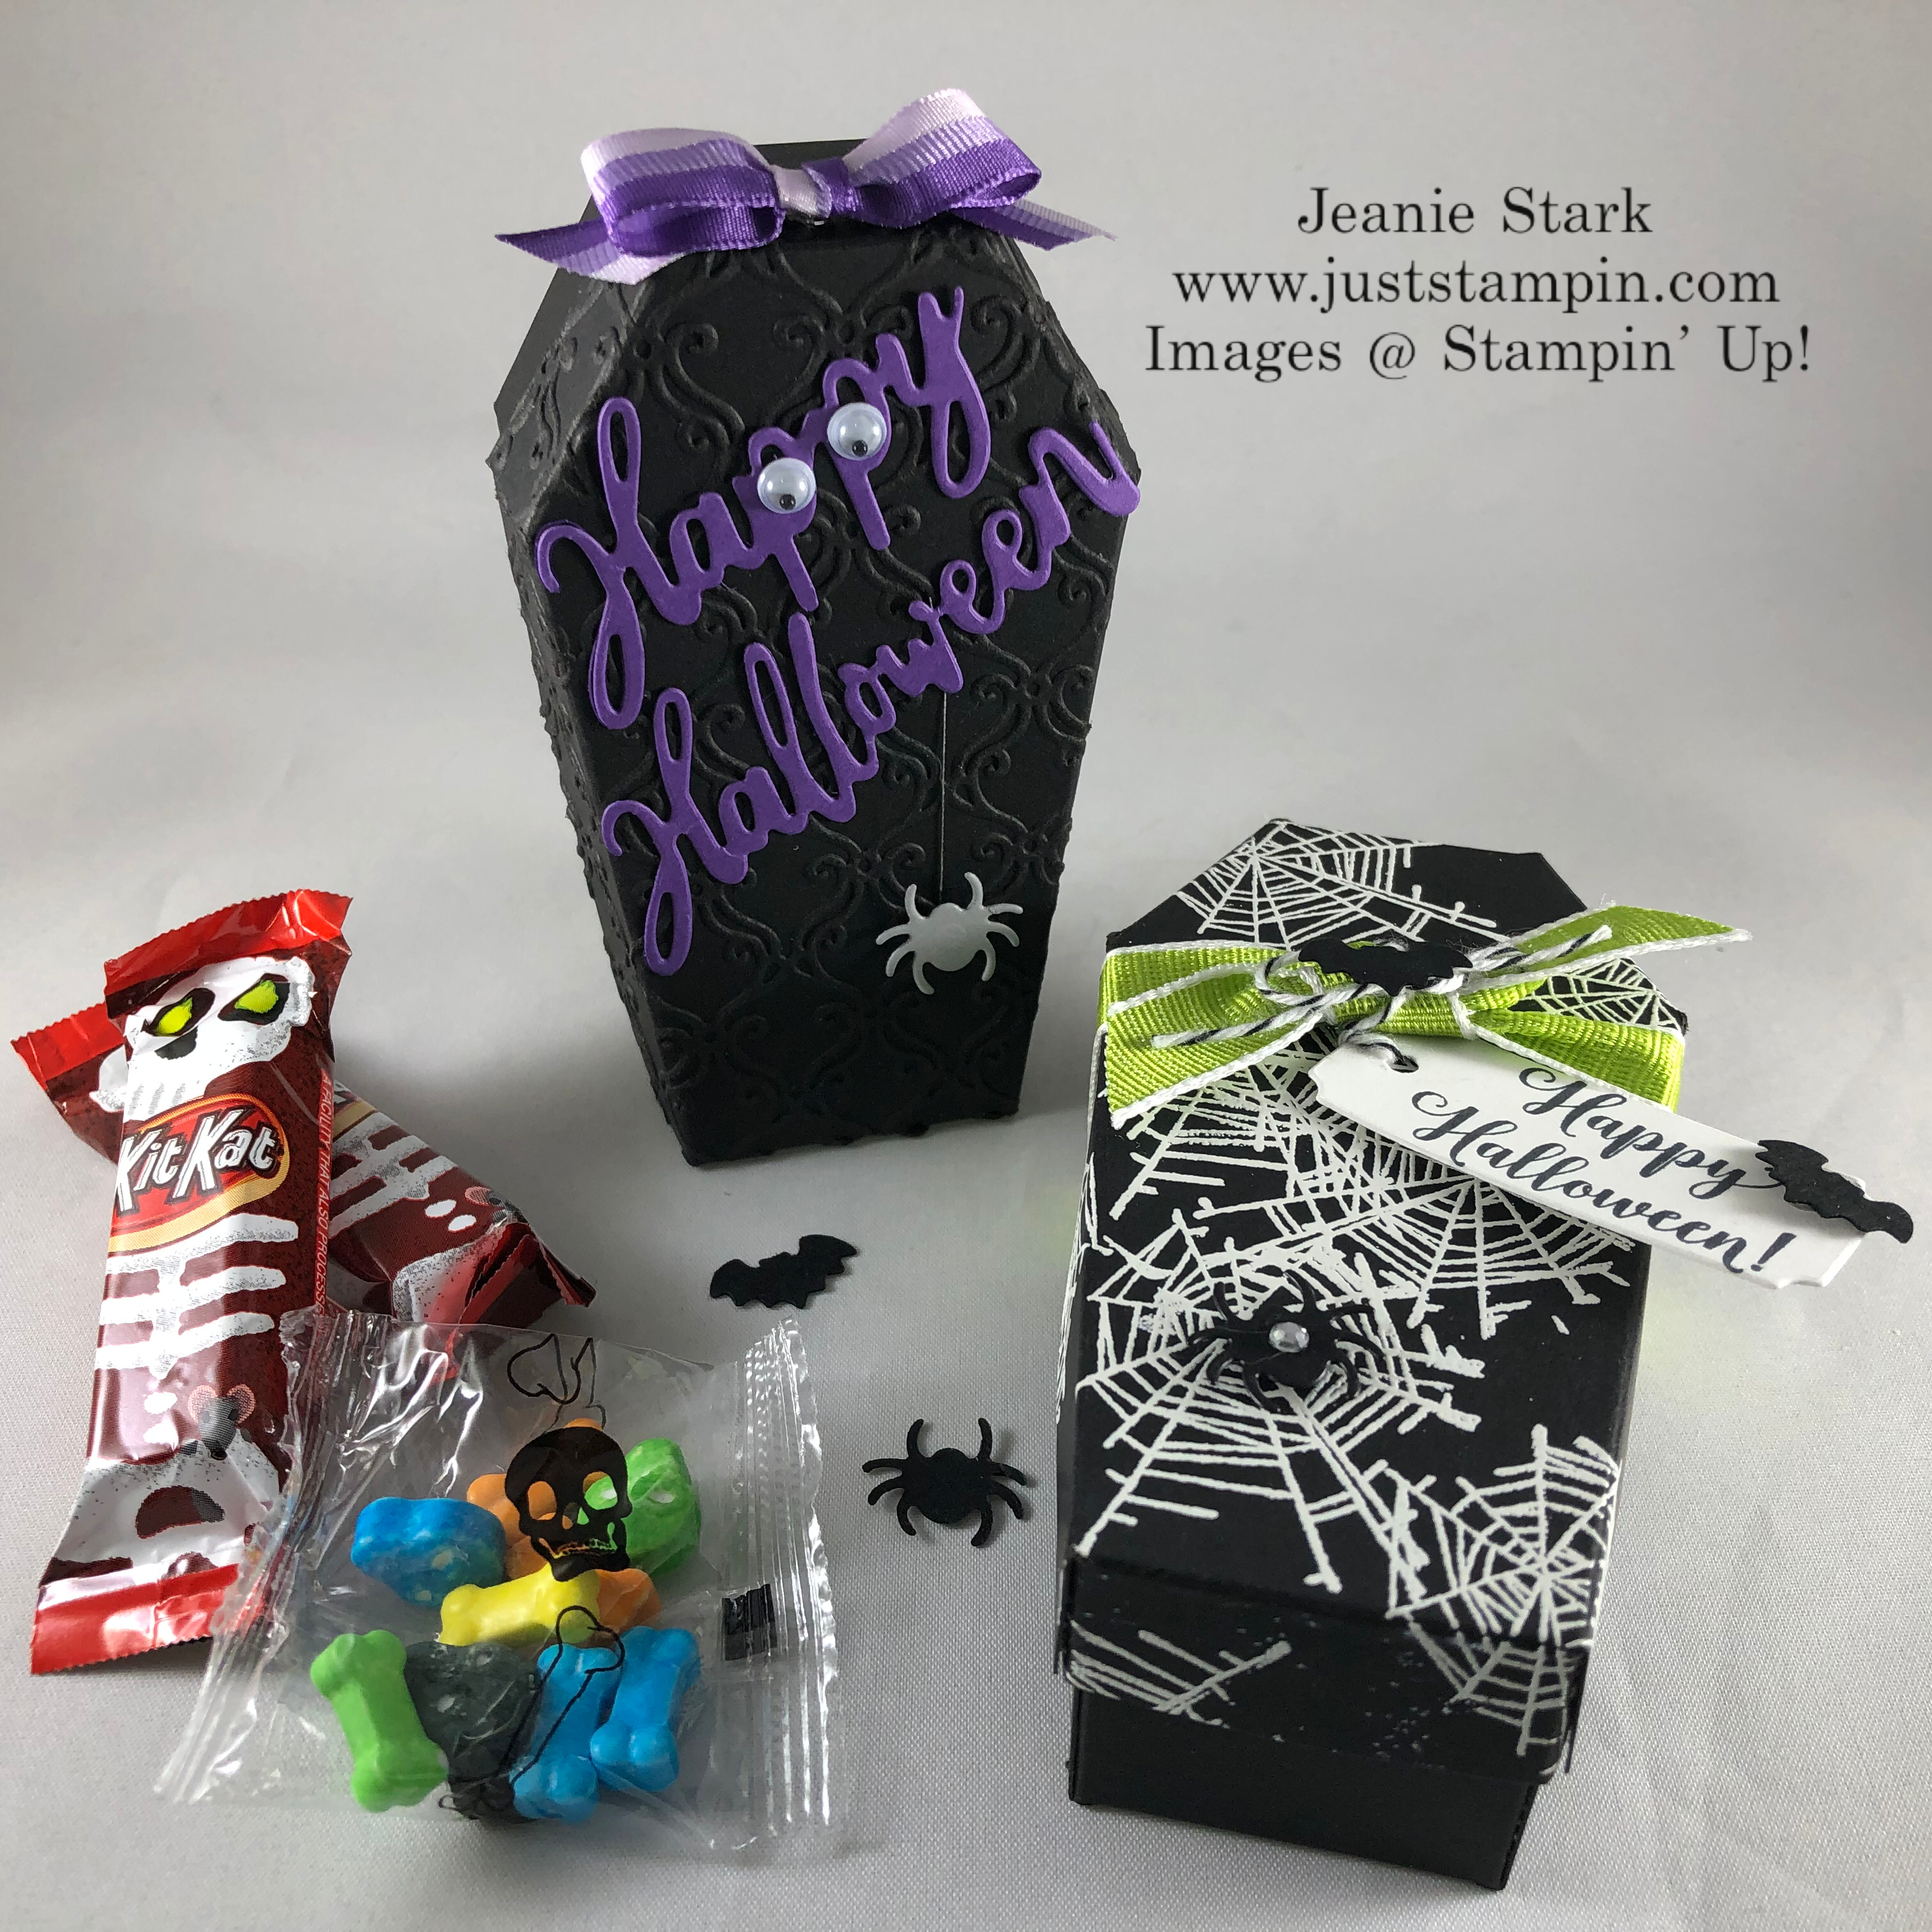 Stampin' Up! Coffin Treat Boxes and Wonderfully Wicked Stamp Set and Dies Halloween treat ideas - Jeanie Stark StampinUp